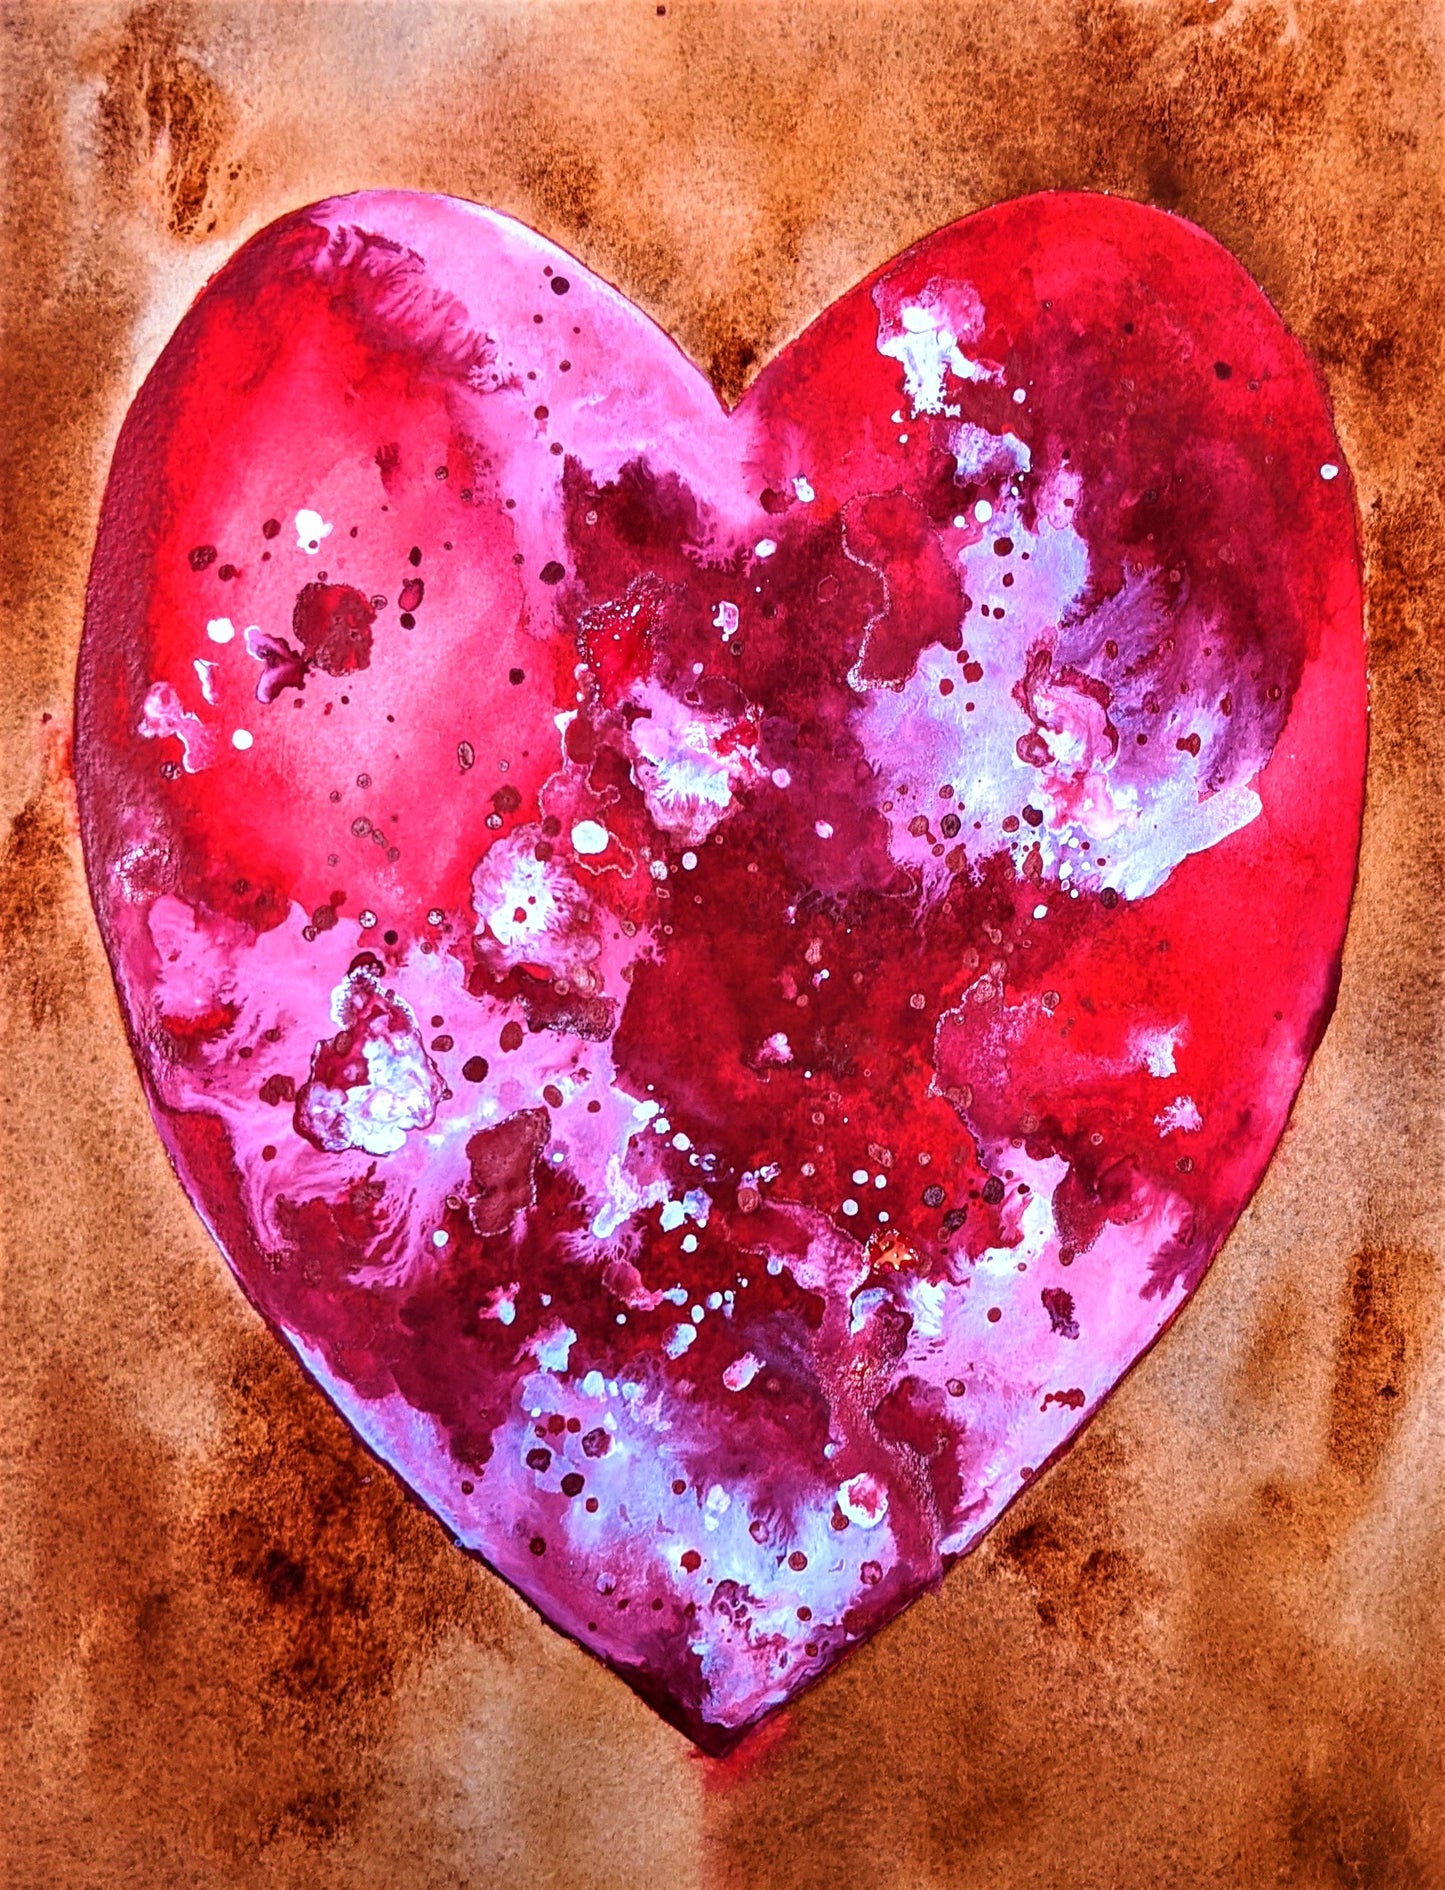 Full Heart watercolor painting on paper